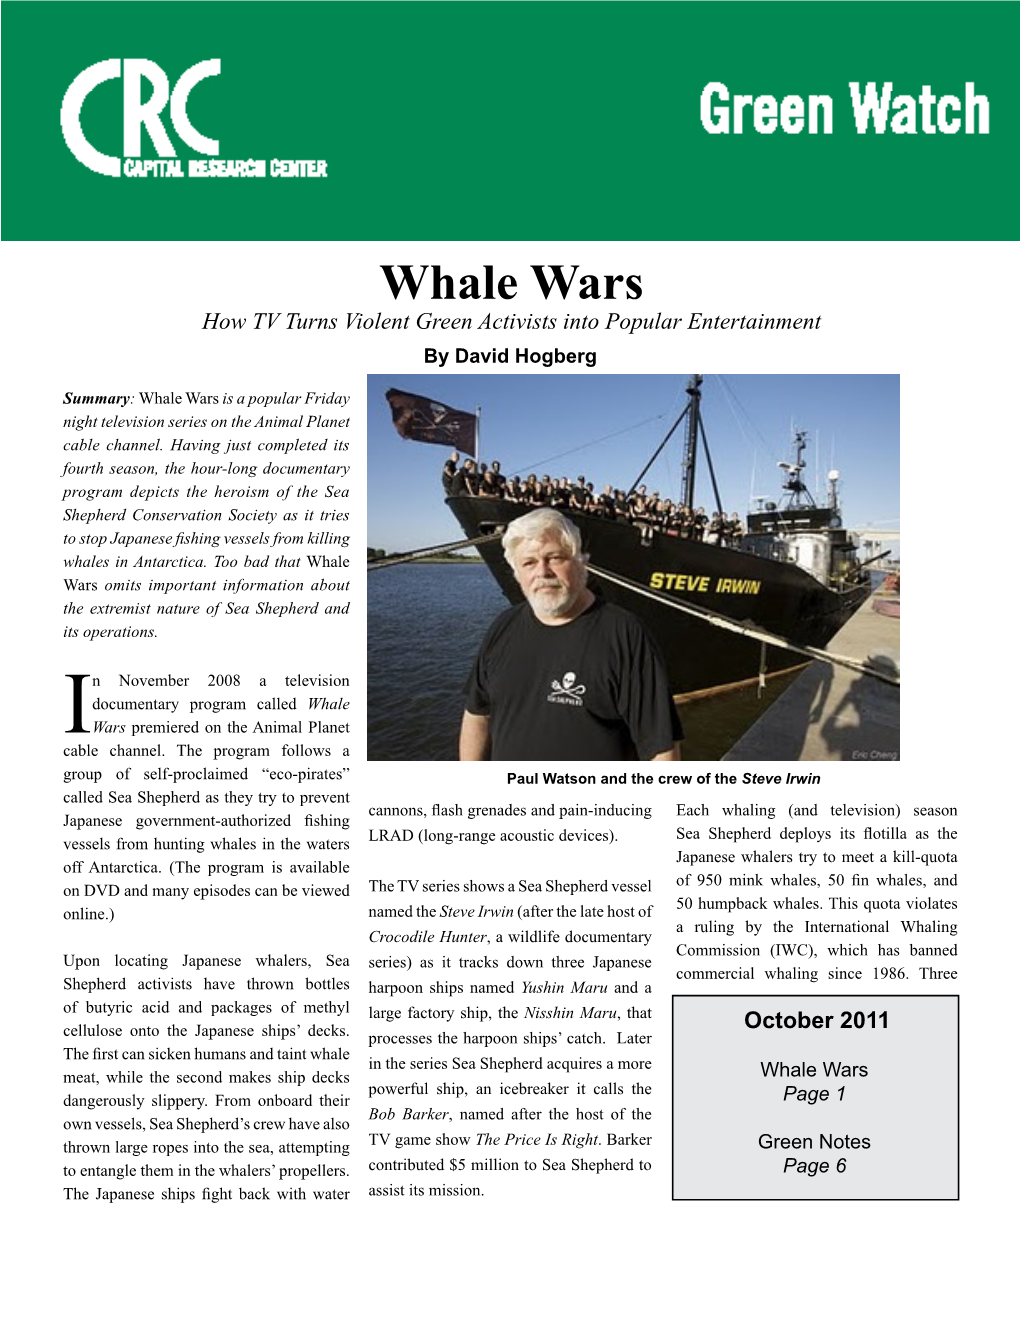 Whale Wars How TV Turns Violent Green Activists Into Popular Entertainment by David Hogberg